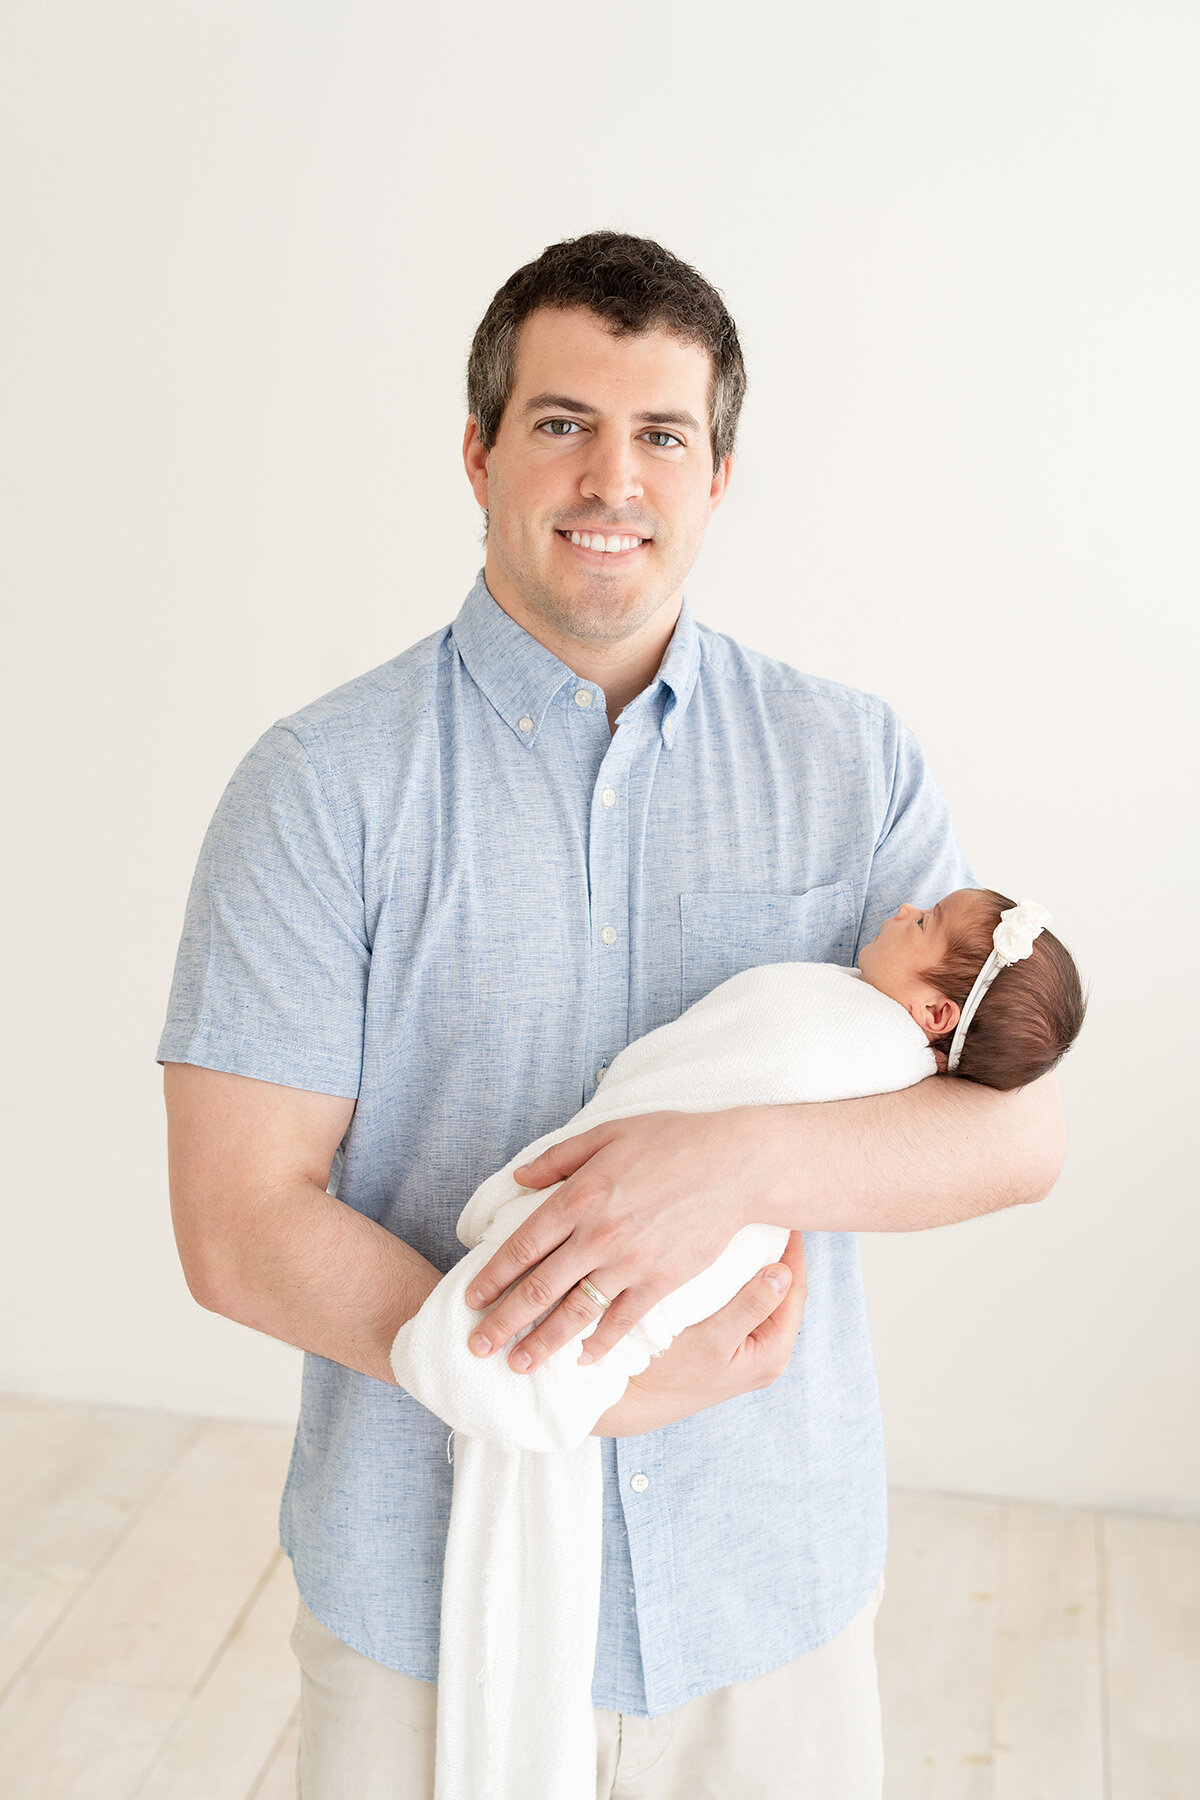 Proud dad smiles at camera while holding his newborn baby